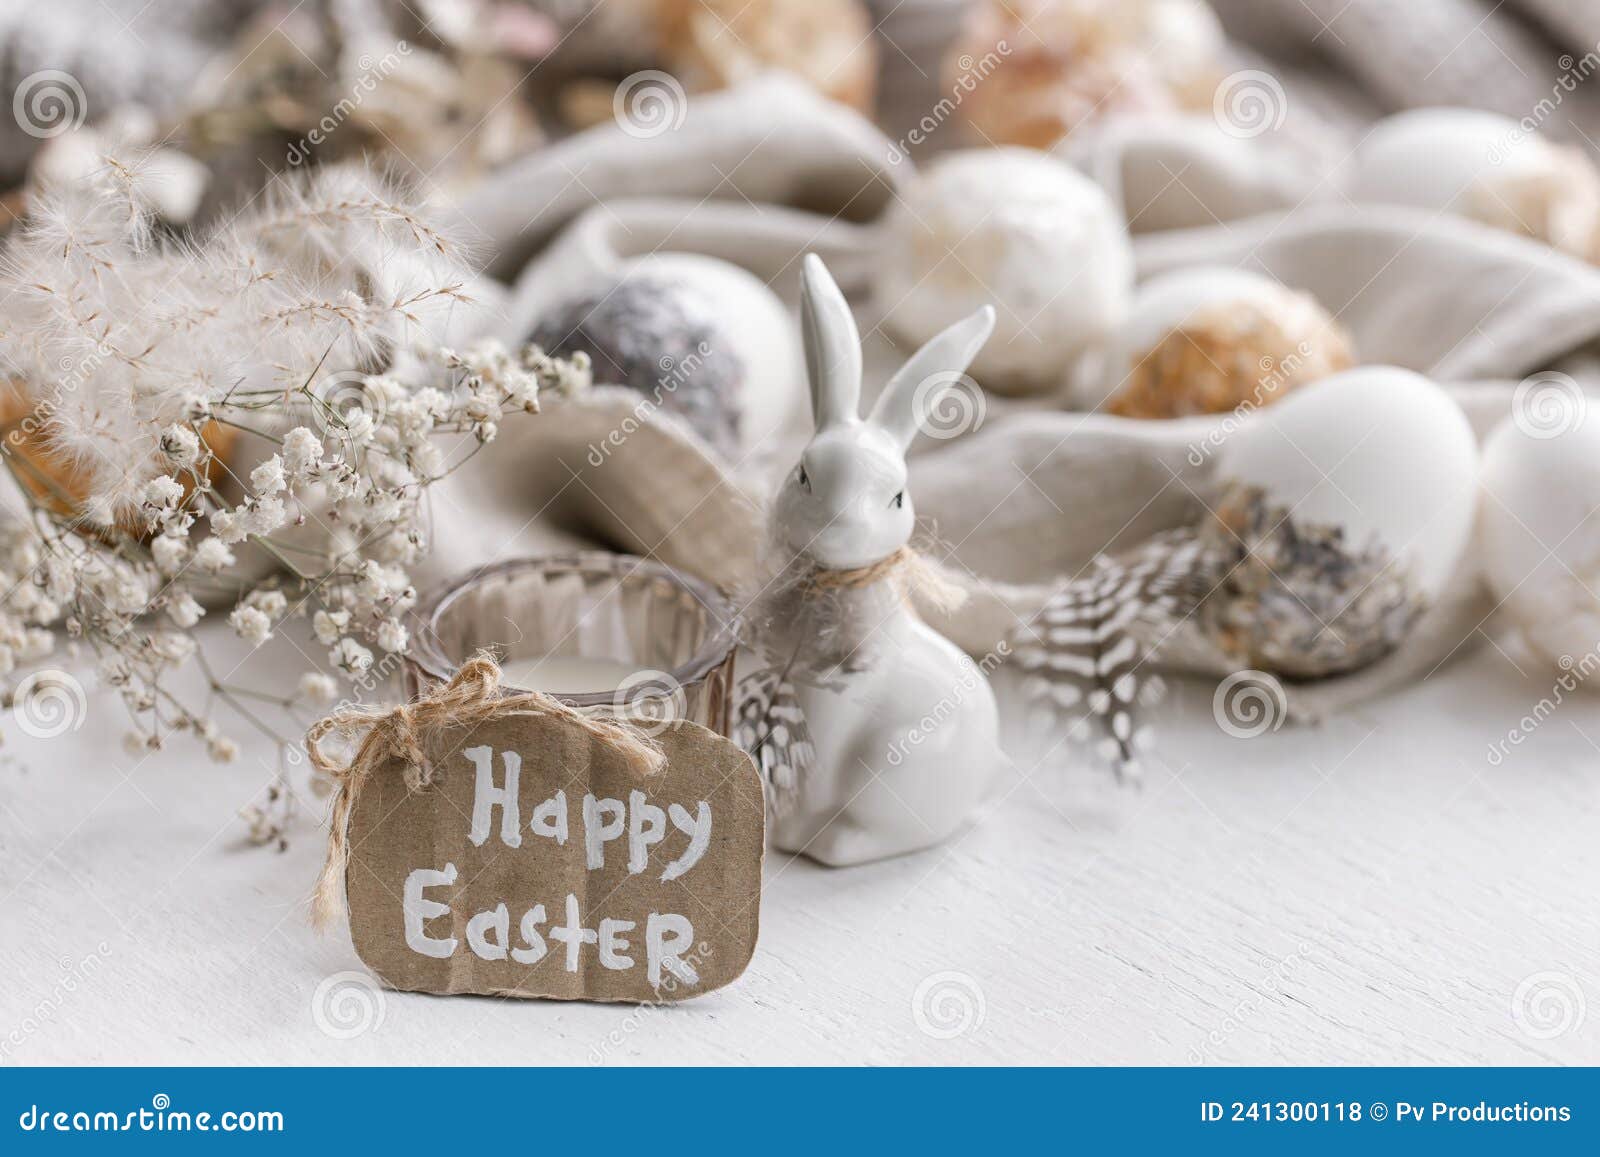 Happy Easter Background with Pastel-colored Decor Details. Stock Photo ...